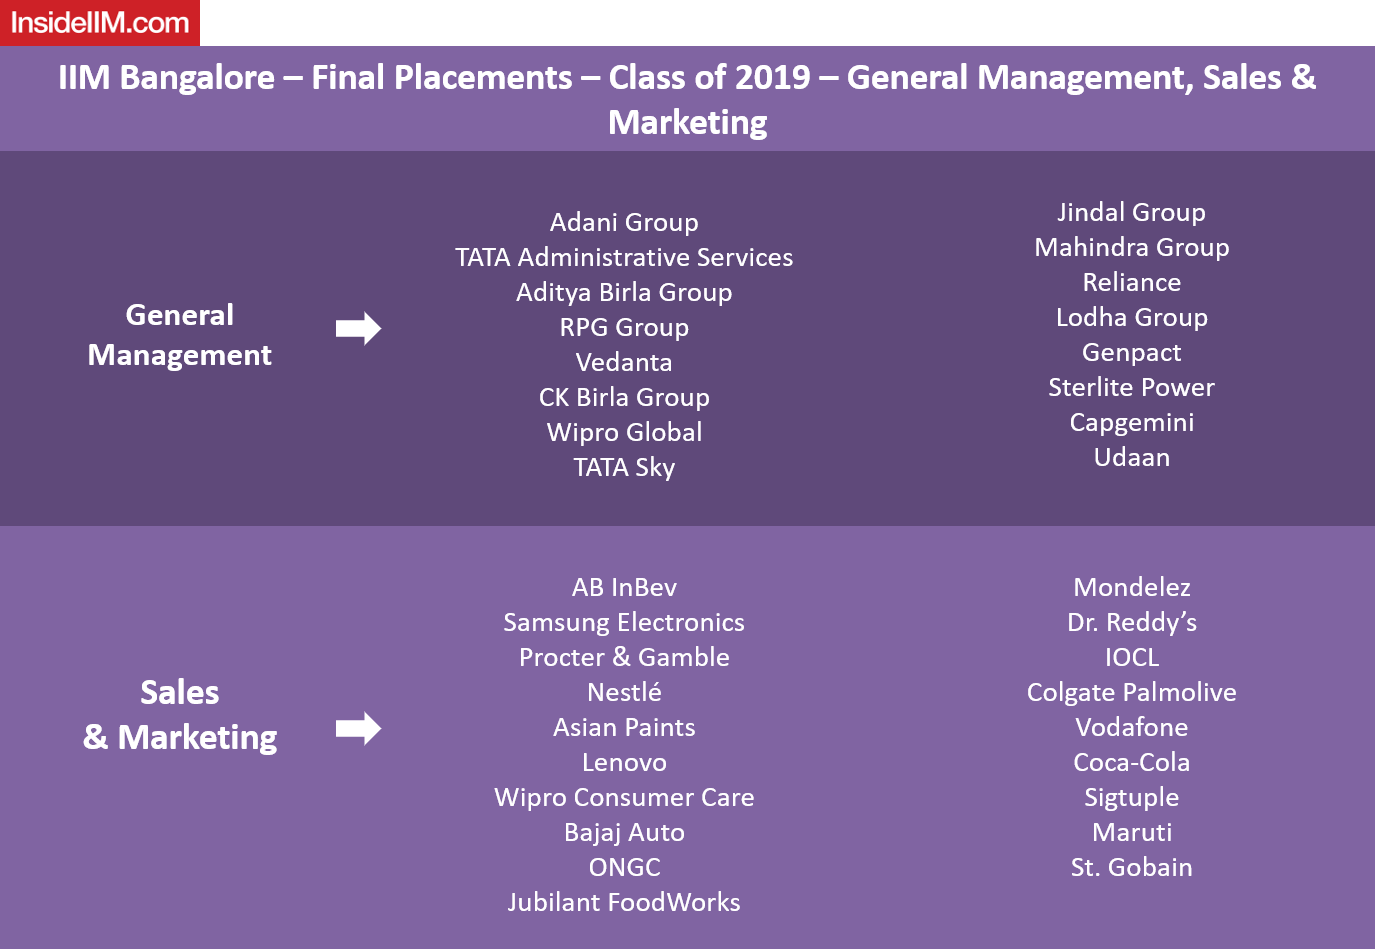 IIM Bangalore Final Placements 2019 - Sales & Marketing and General Management